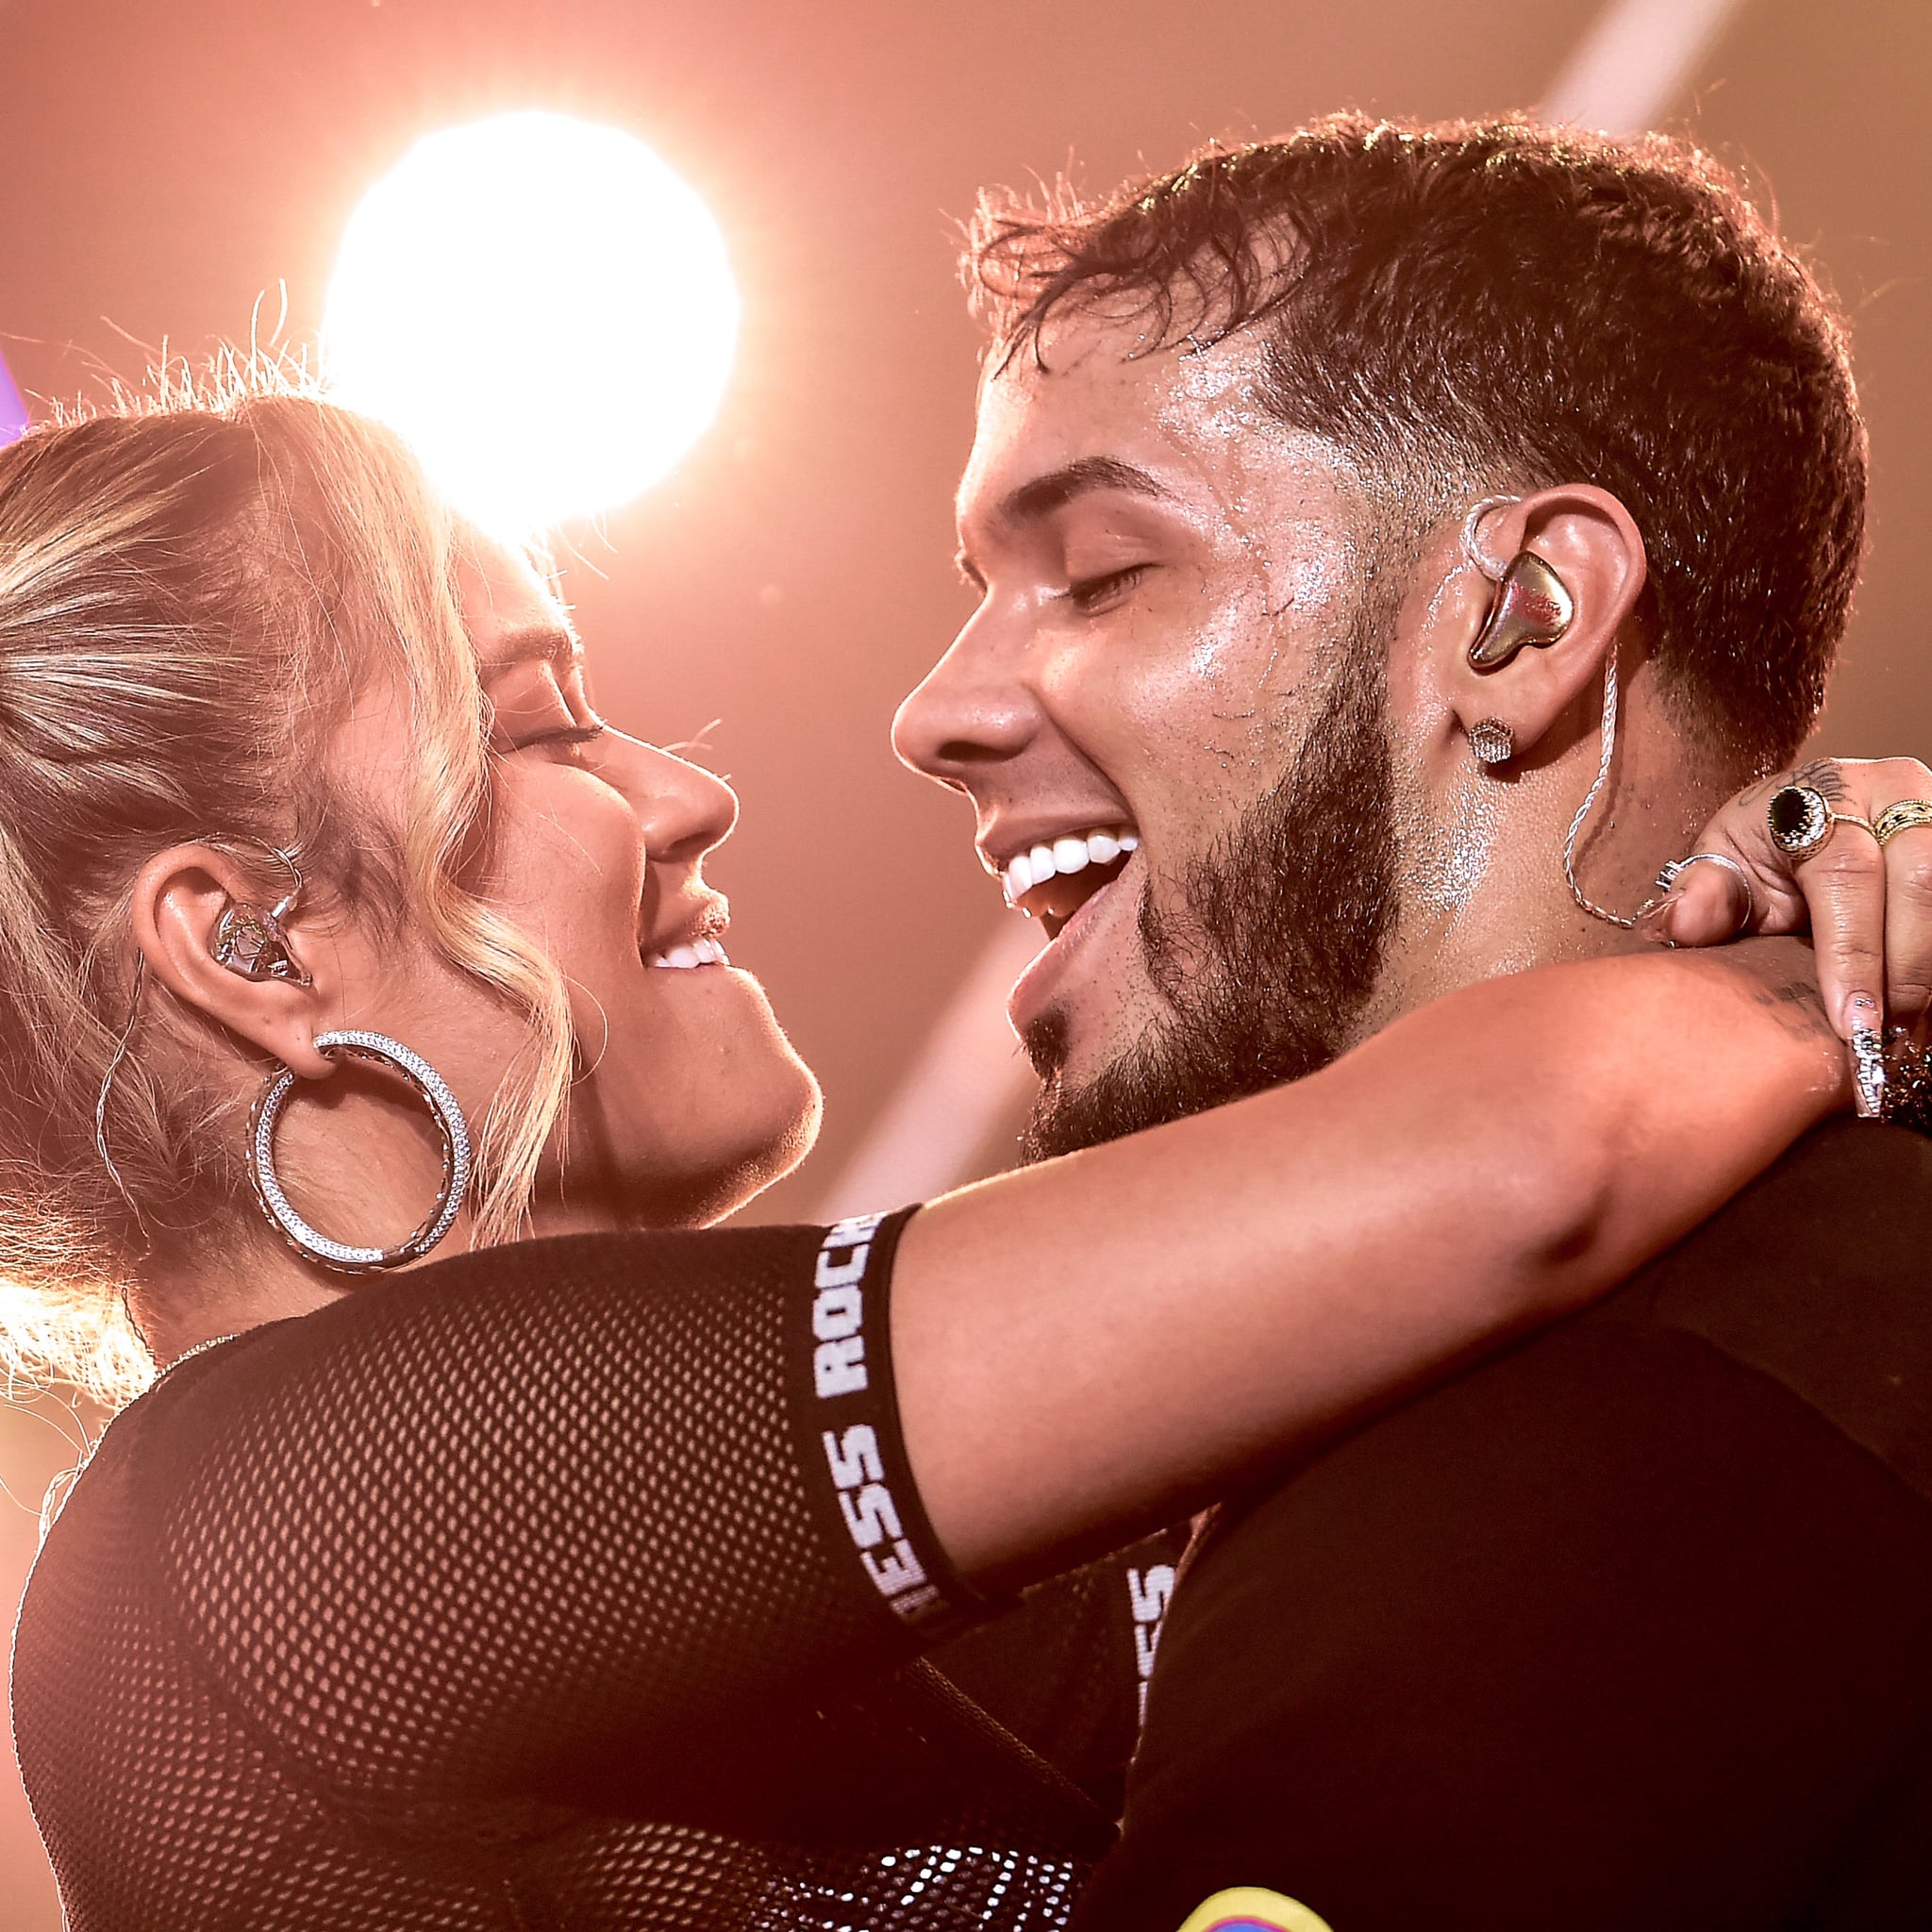 Anuel AA  Karol G Discuss Touring Together Their First Kiss On Stage   More  Billboard  First kiss Billboard Touring